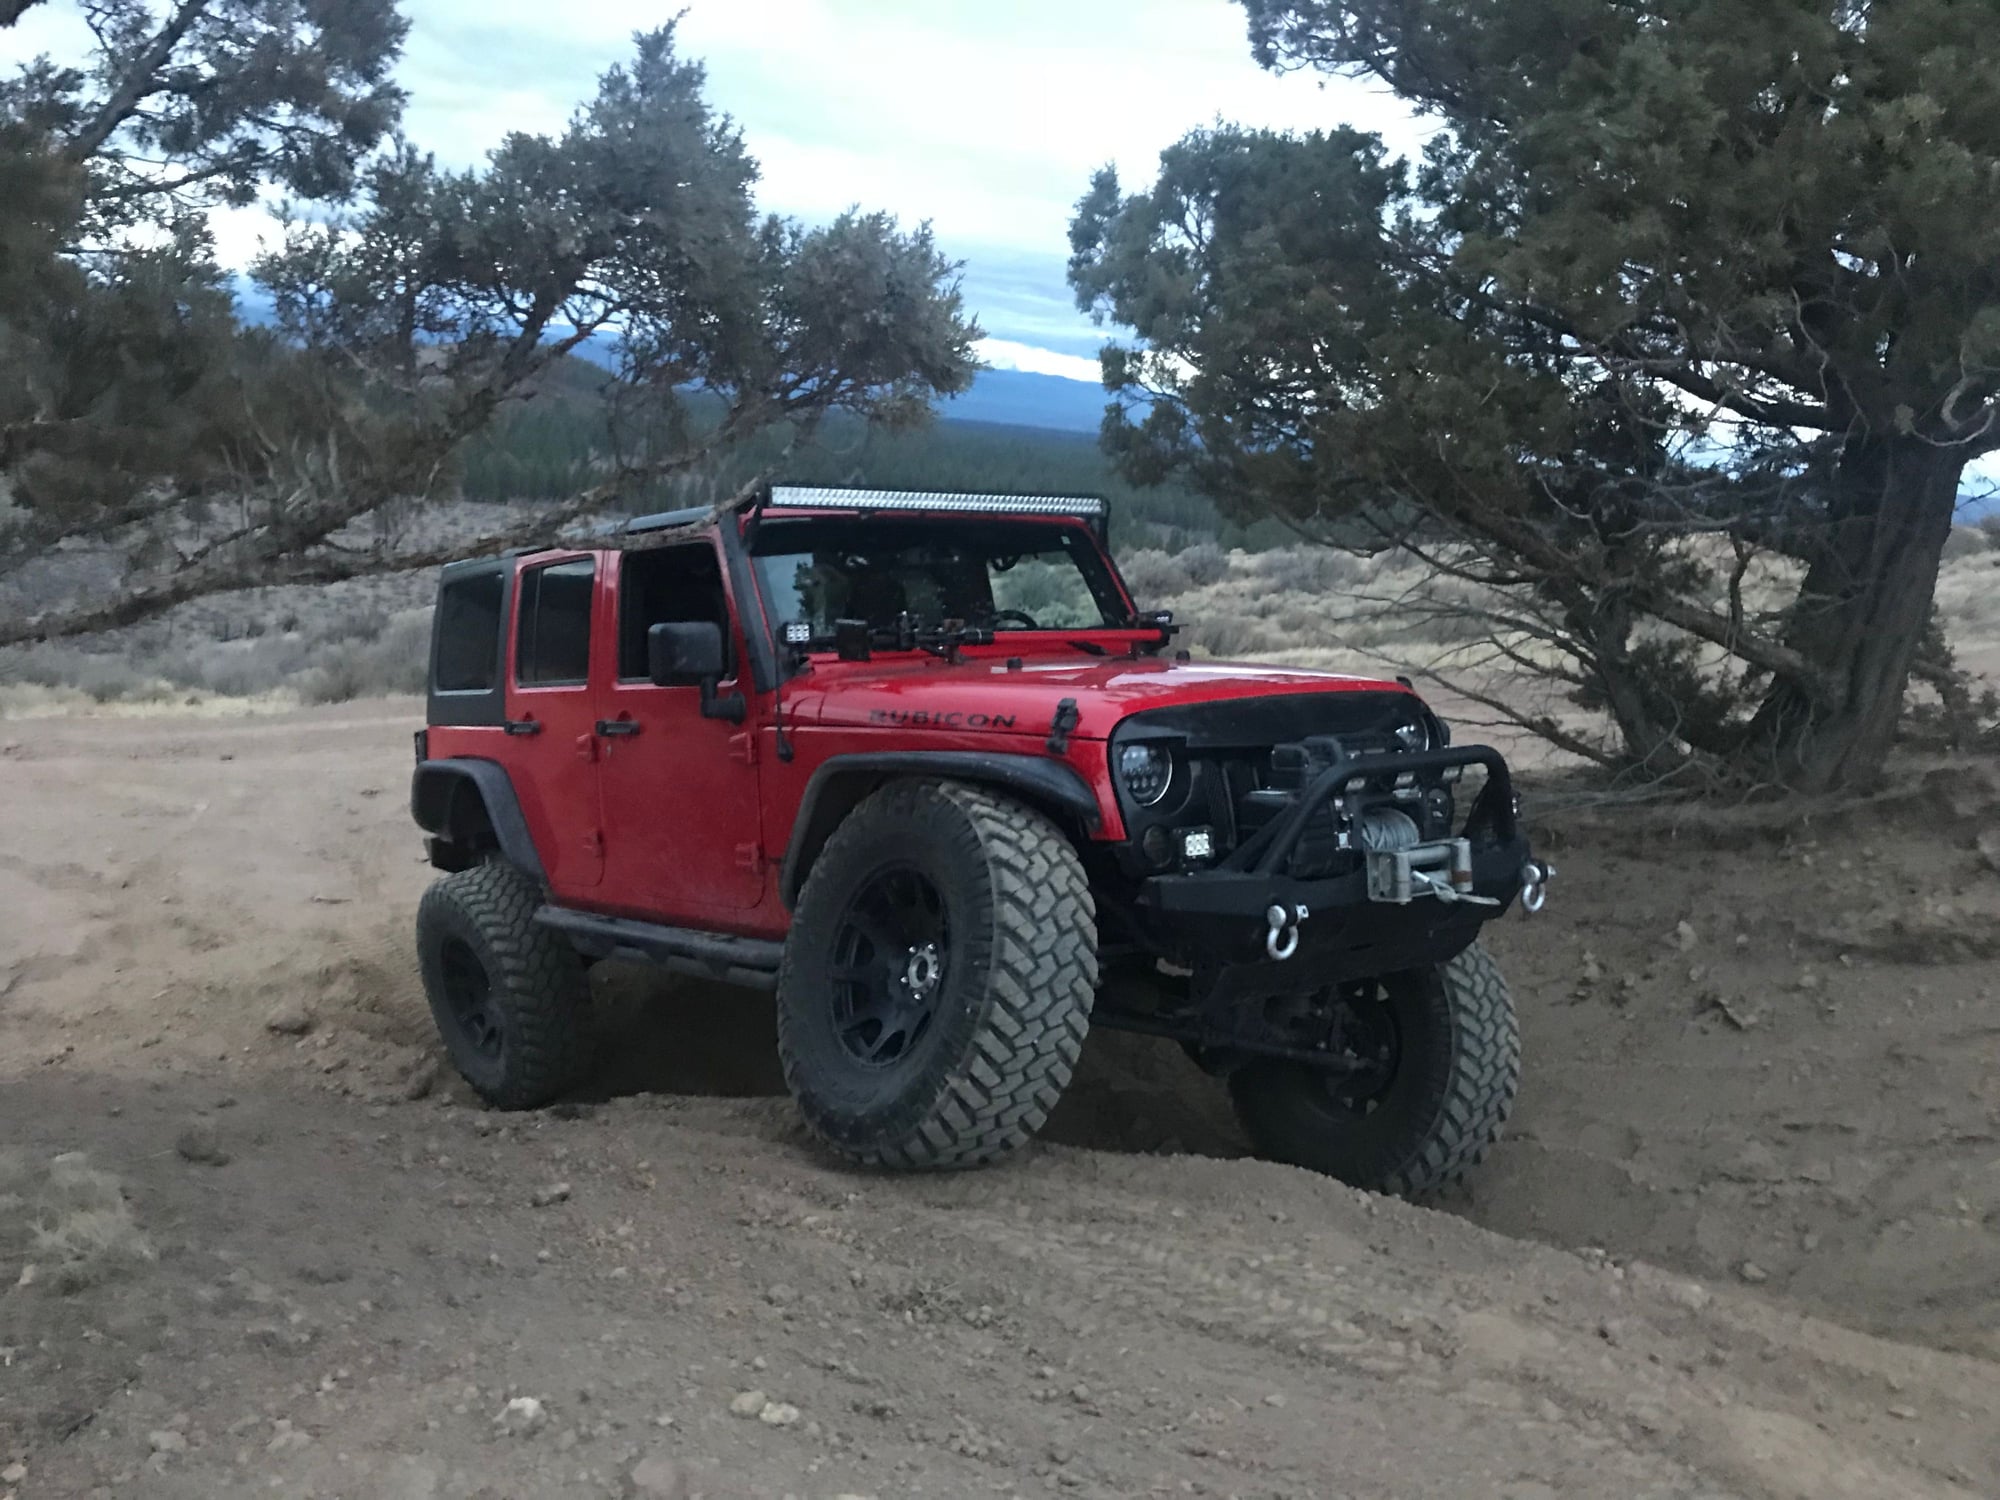 2015 Jeep Wrangler - 2015 Wrangler Unlimited Rubicon - Used - VIN 1c4bjwfg6fl757442 - 31,000 Miles - 6 cyl - Automatic - Red - Bend, OR 97702, United States